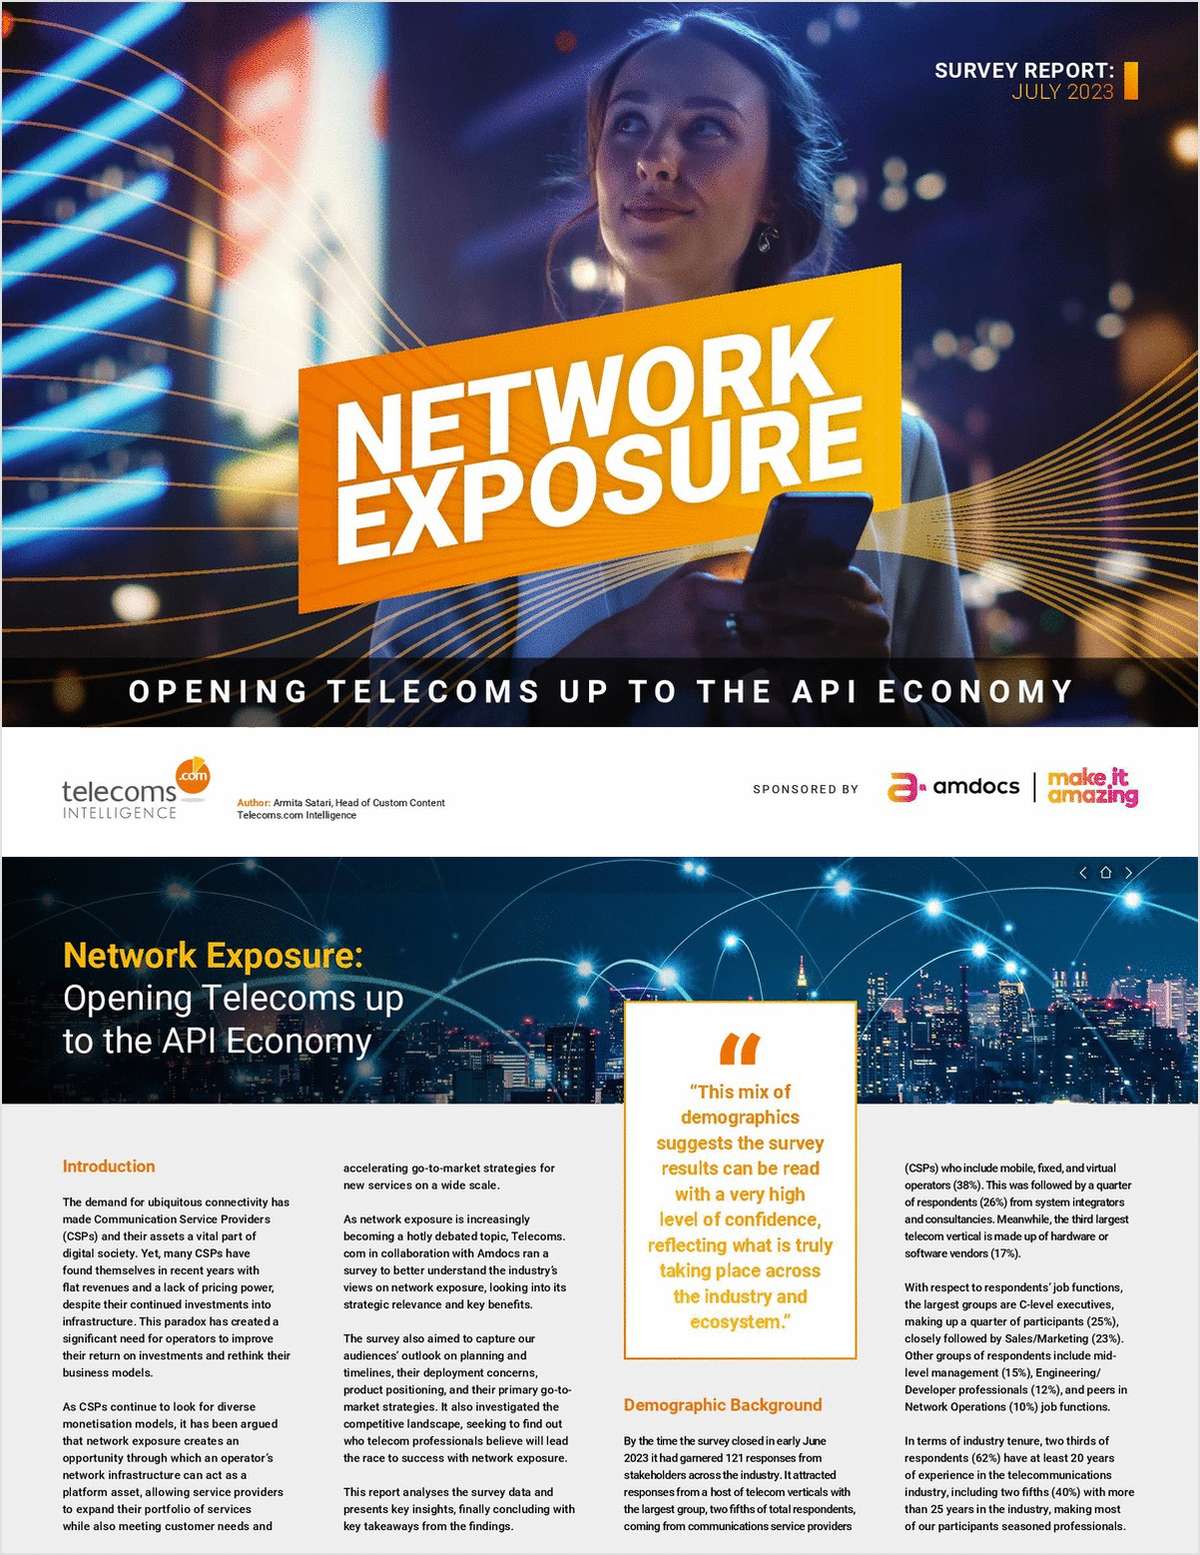 Network Exposure: Opening Telecoms up to the API Economy